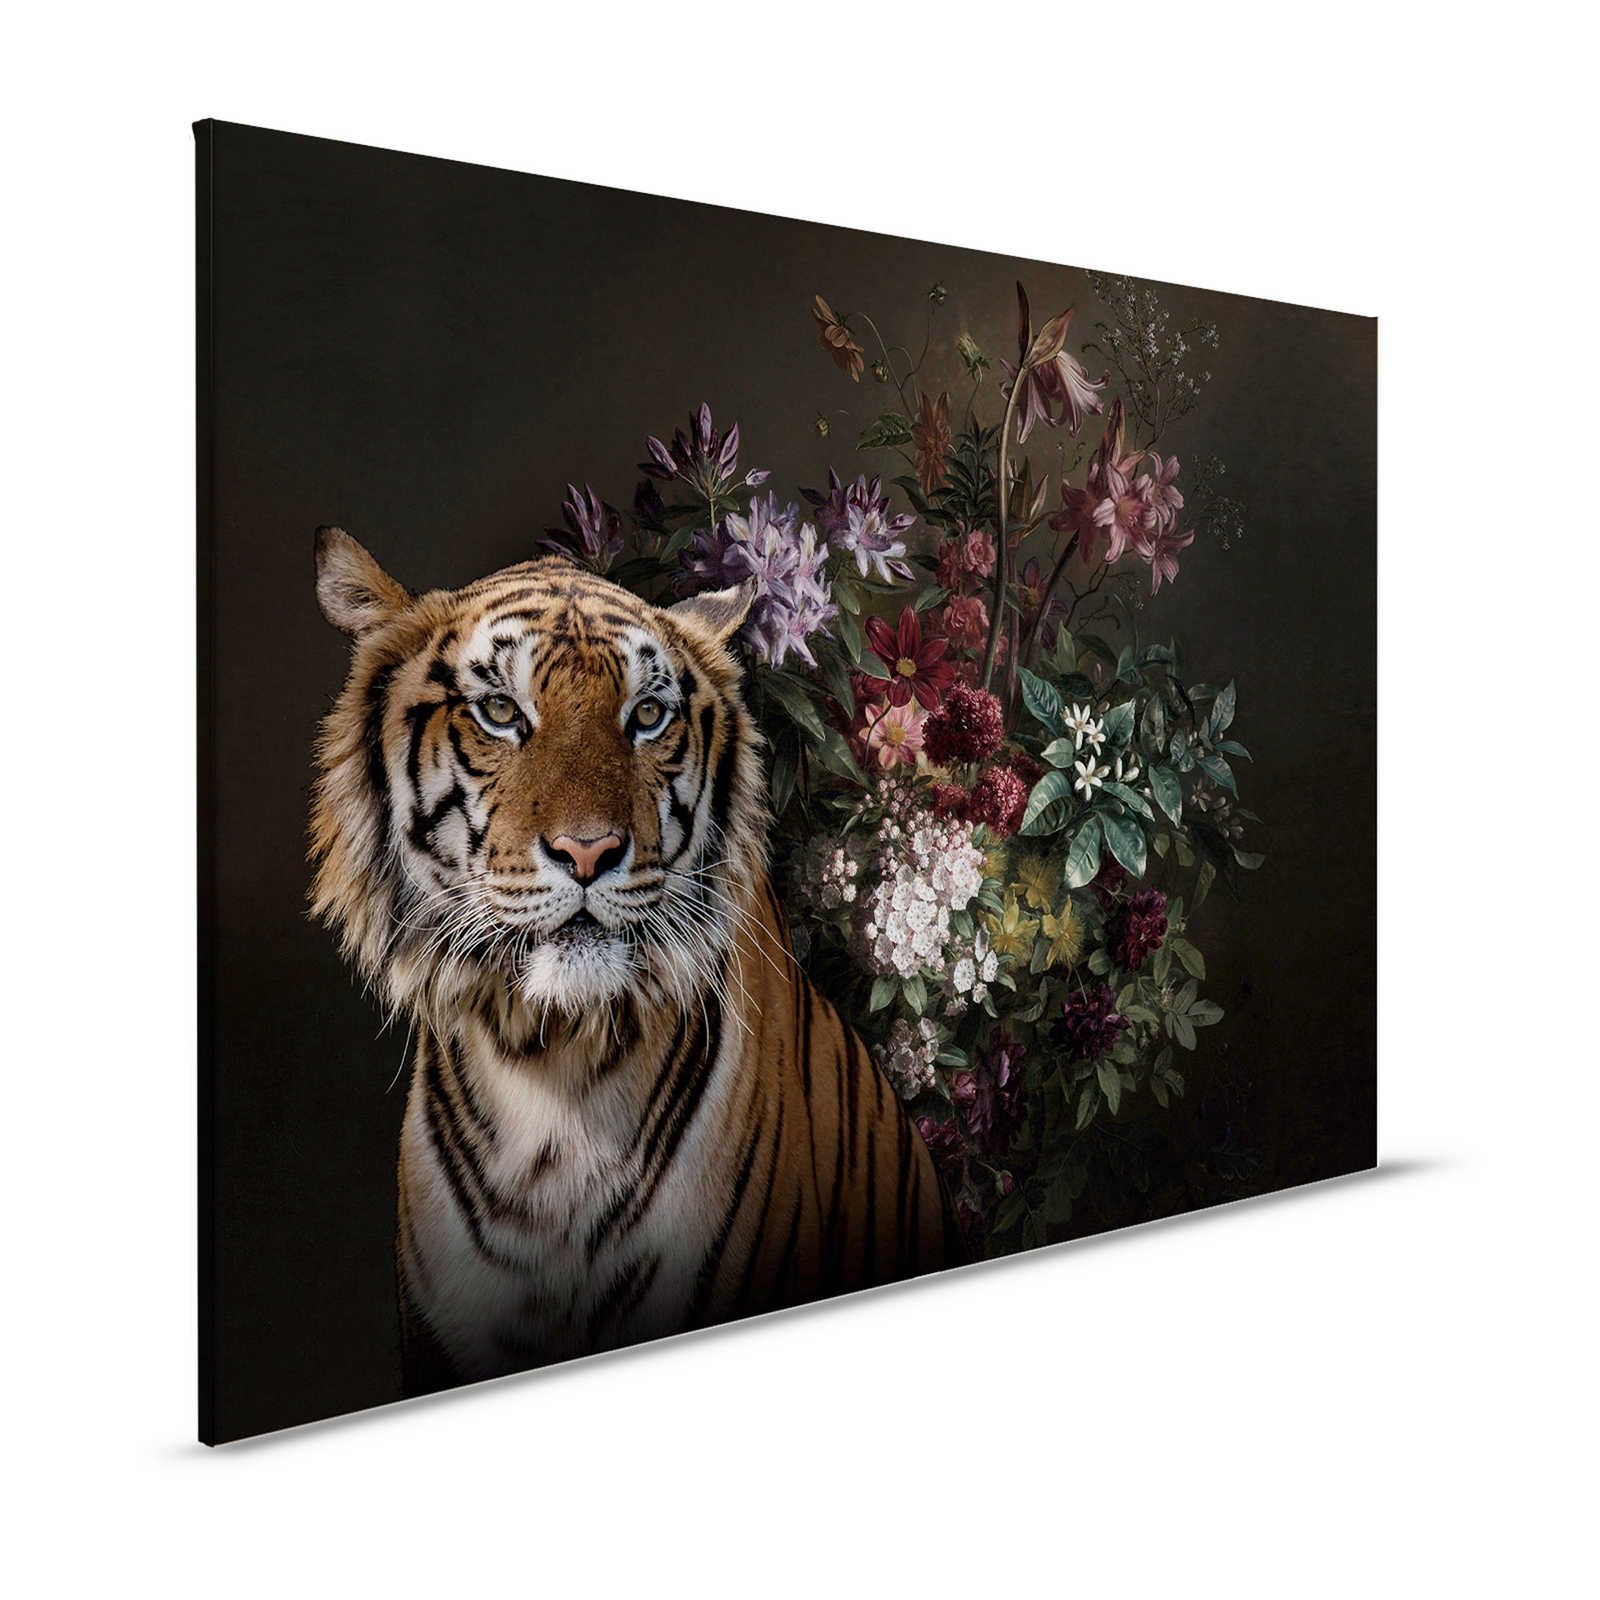 Canvas painting Tiger Portrait with Flowers - 1,20 m x 0,80 m
